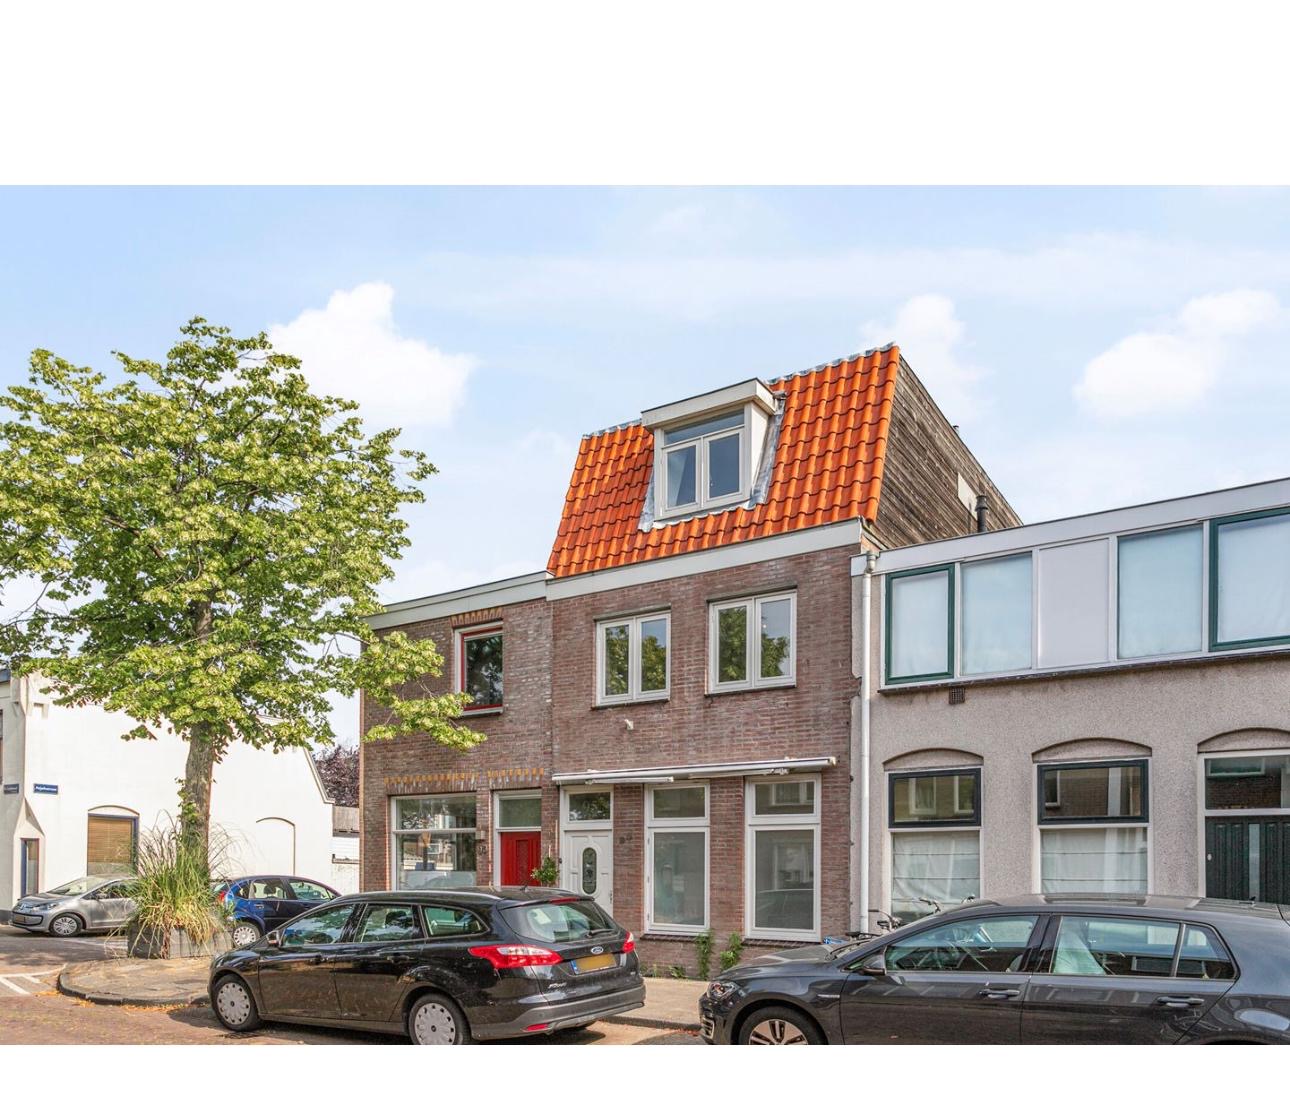 Single-family home in Haarlem